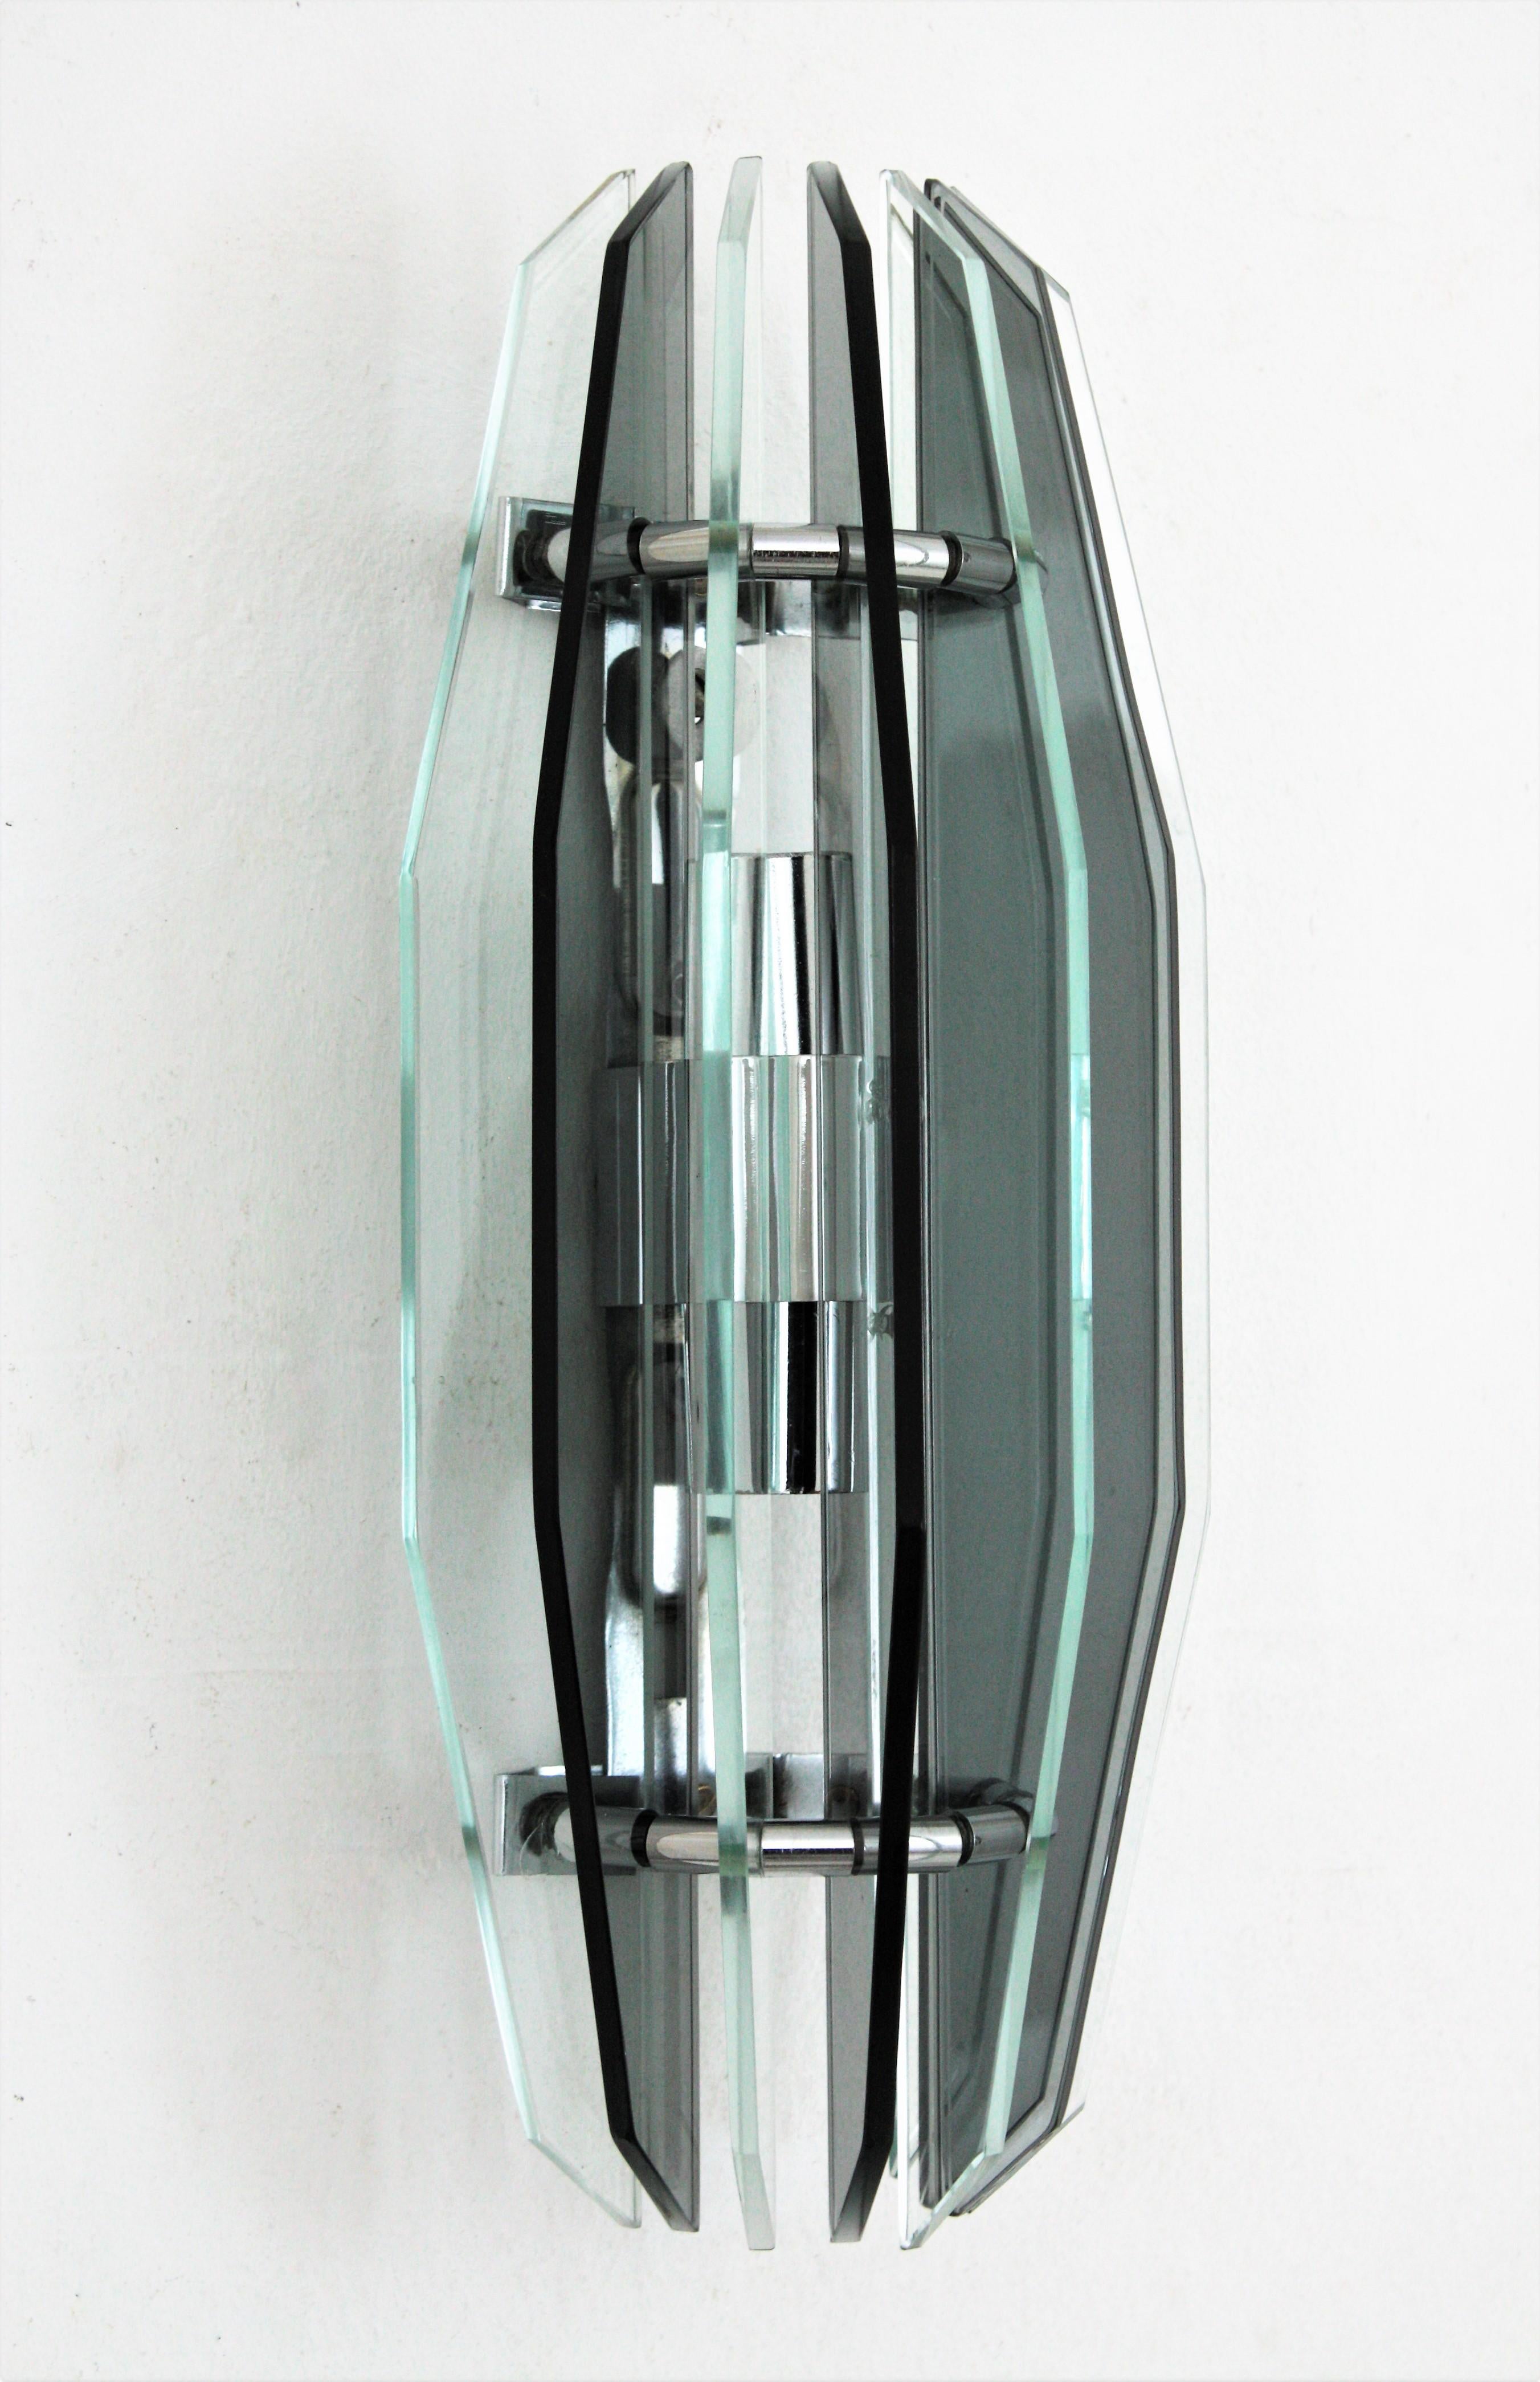 20th Century Midcentury Italian Glass Wall Sconce in the Manner of Fontana Arte For Sale